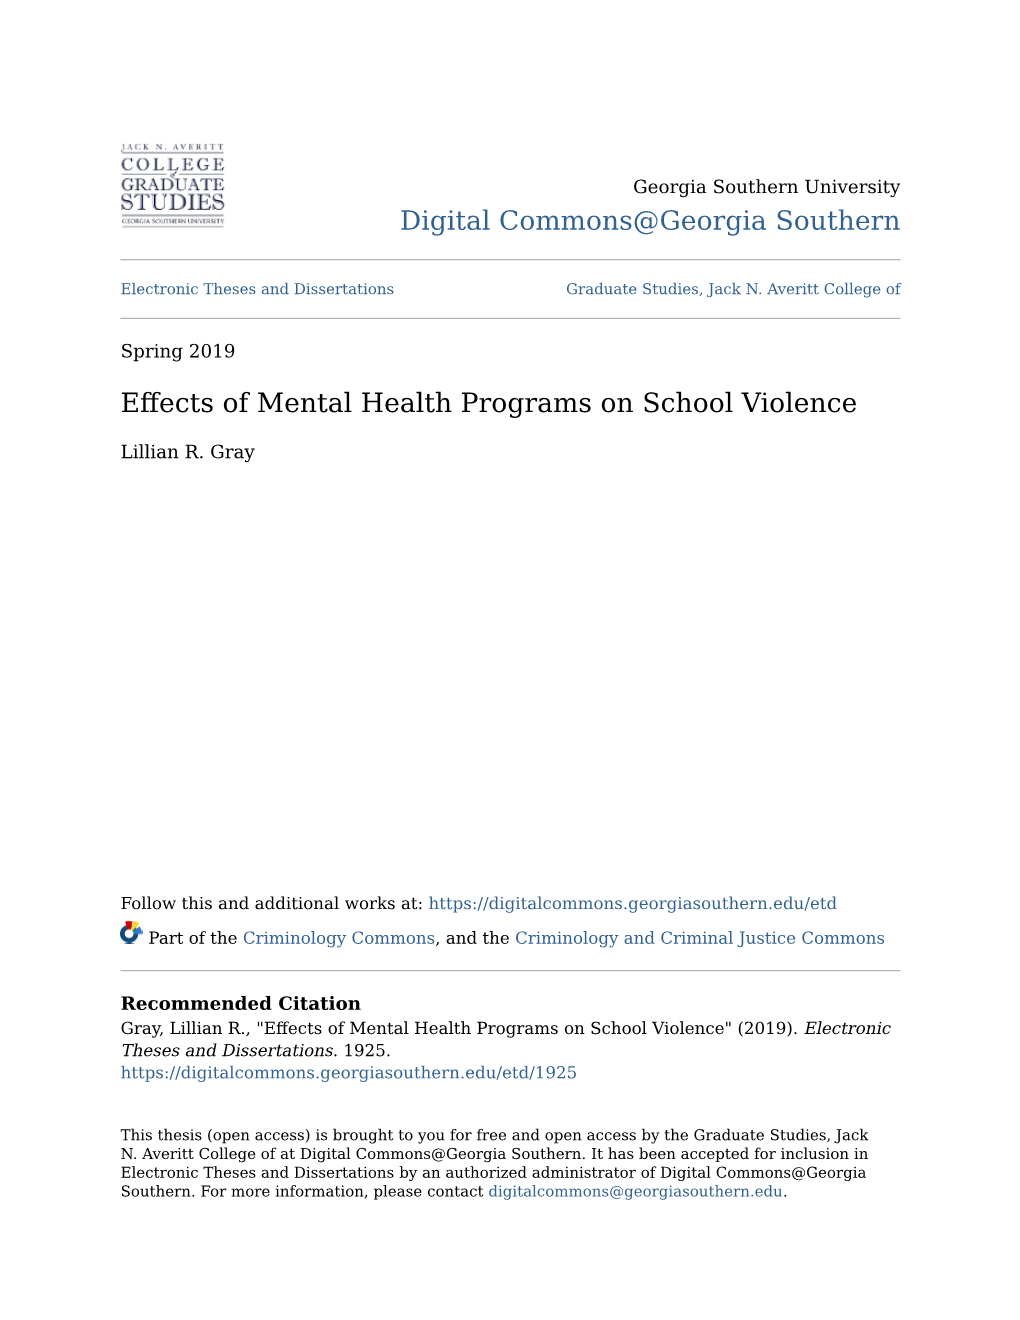 EFFECTS of MENTAL HEALTH PROGRAMS on SCHOOL VIOLENCE by LILLIAN GRAY (Under the Direction of Laura E